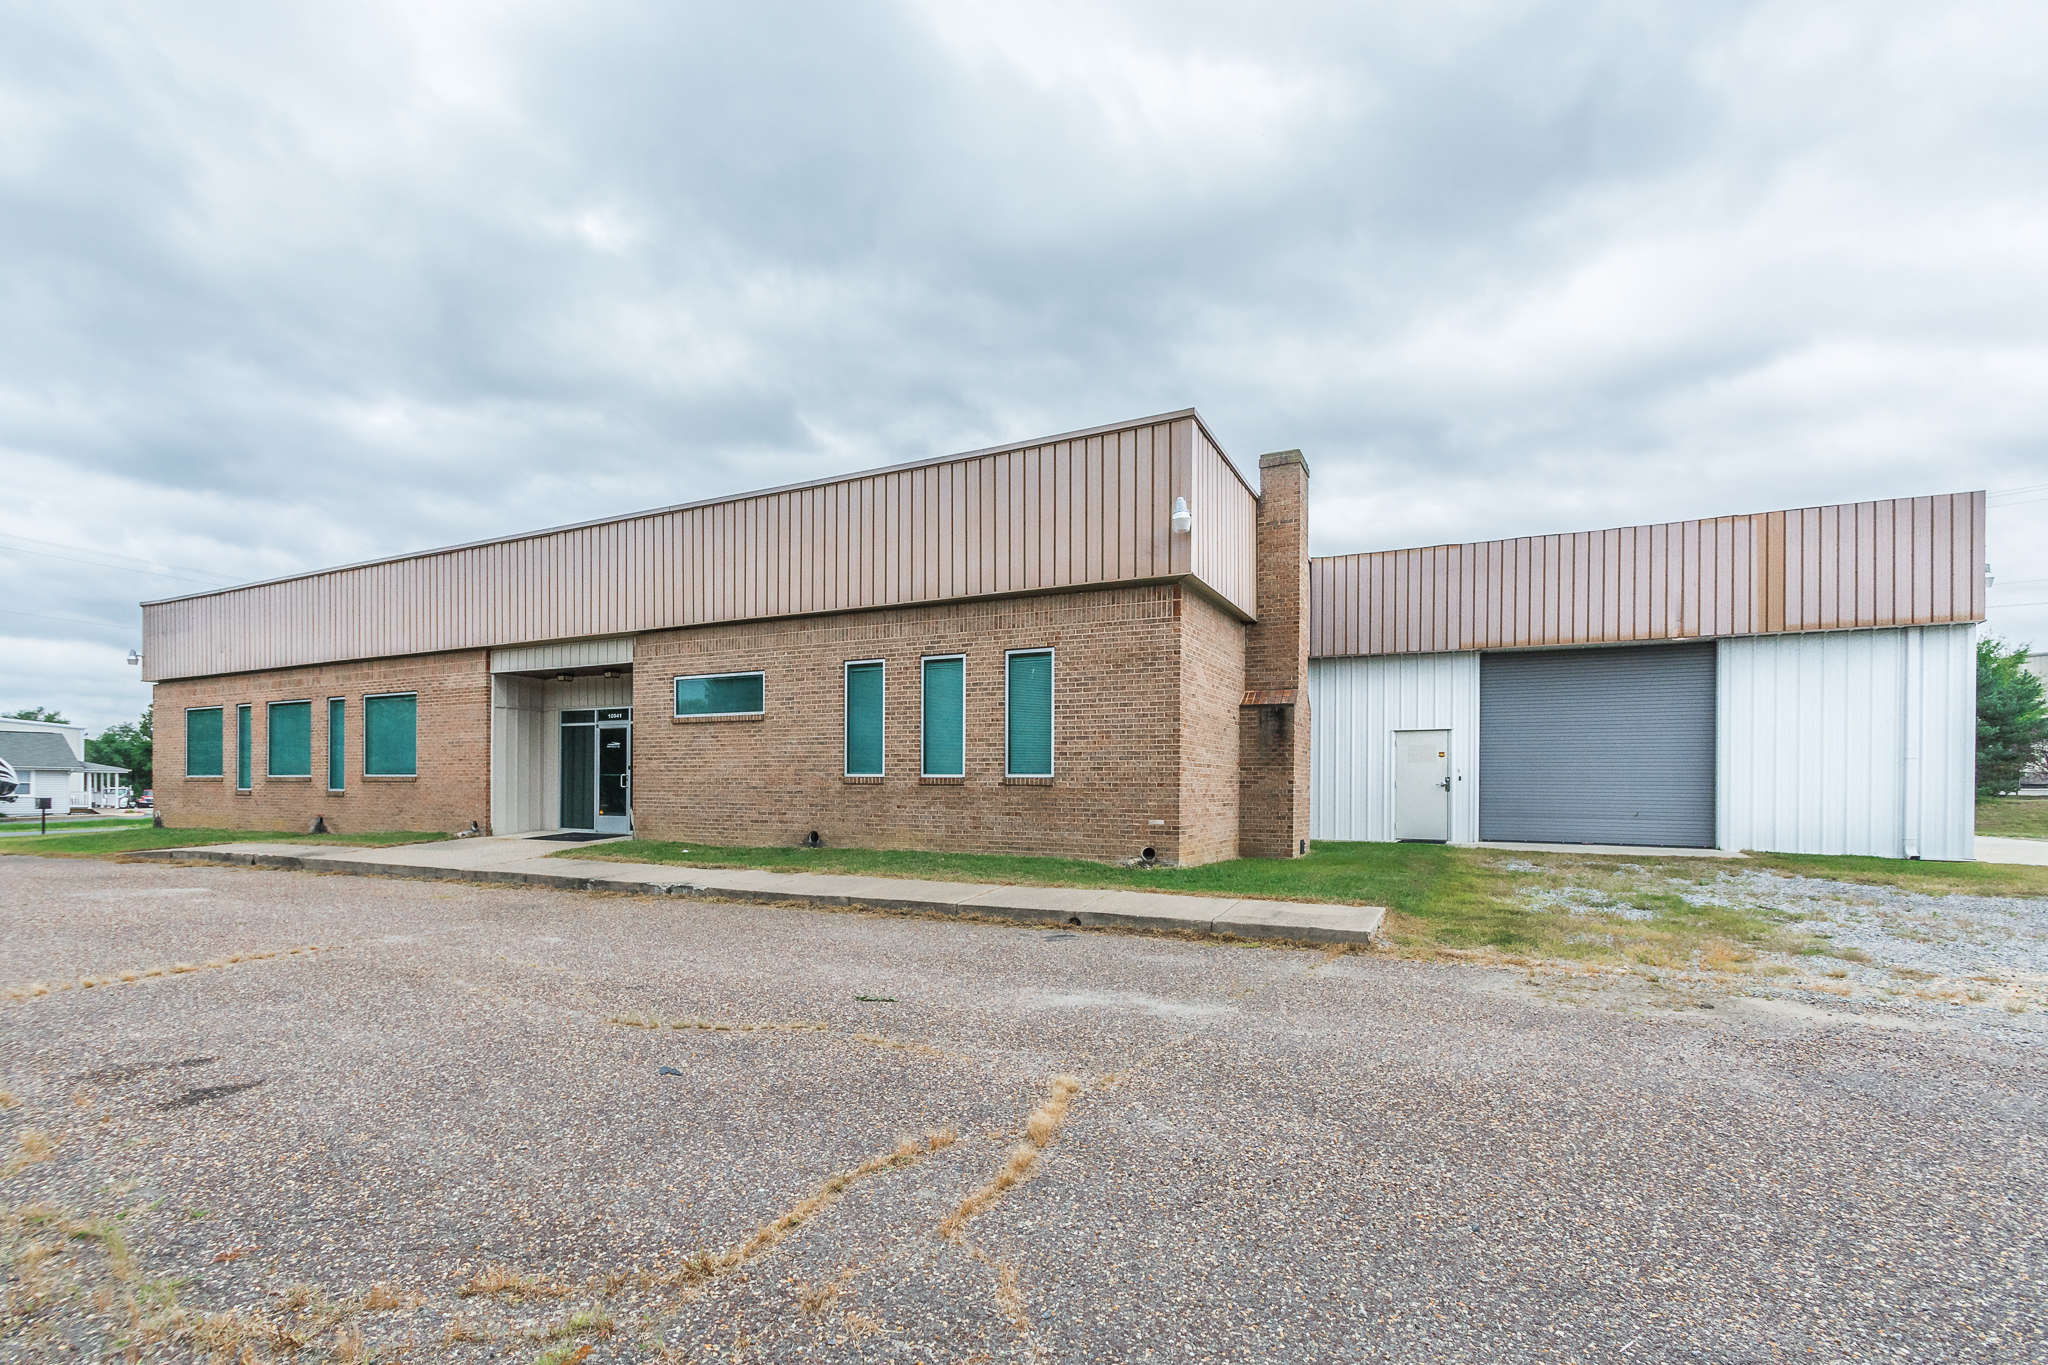 Coldwell Banker Commercial Elite Brokers Sale of 9,900 SF Flex Building for $850,000